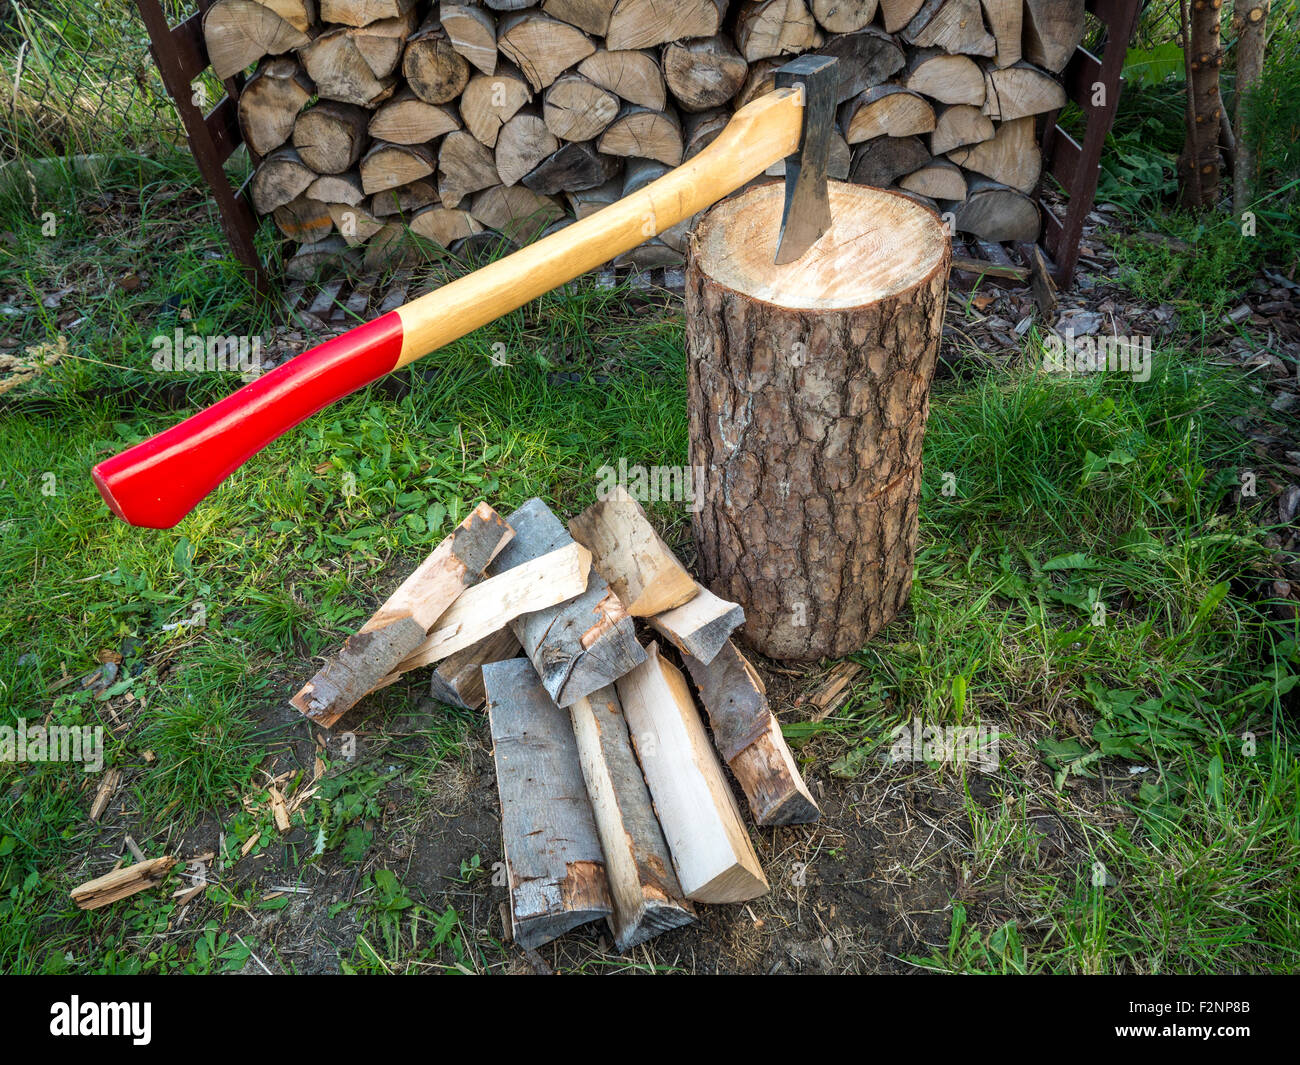 Axe on chopping block with chopped logs Stock Photo